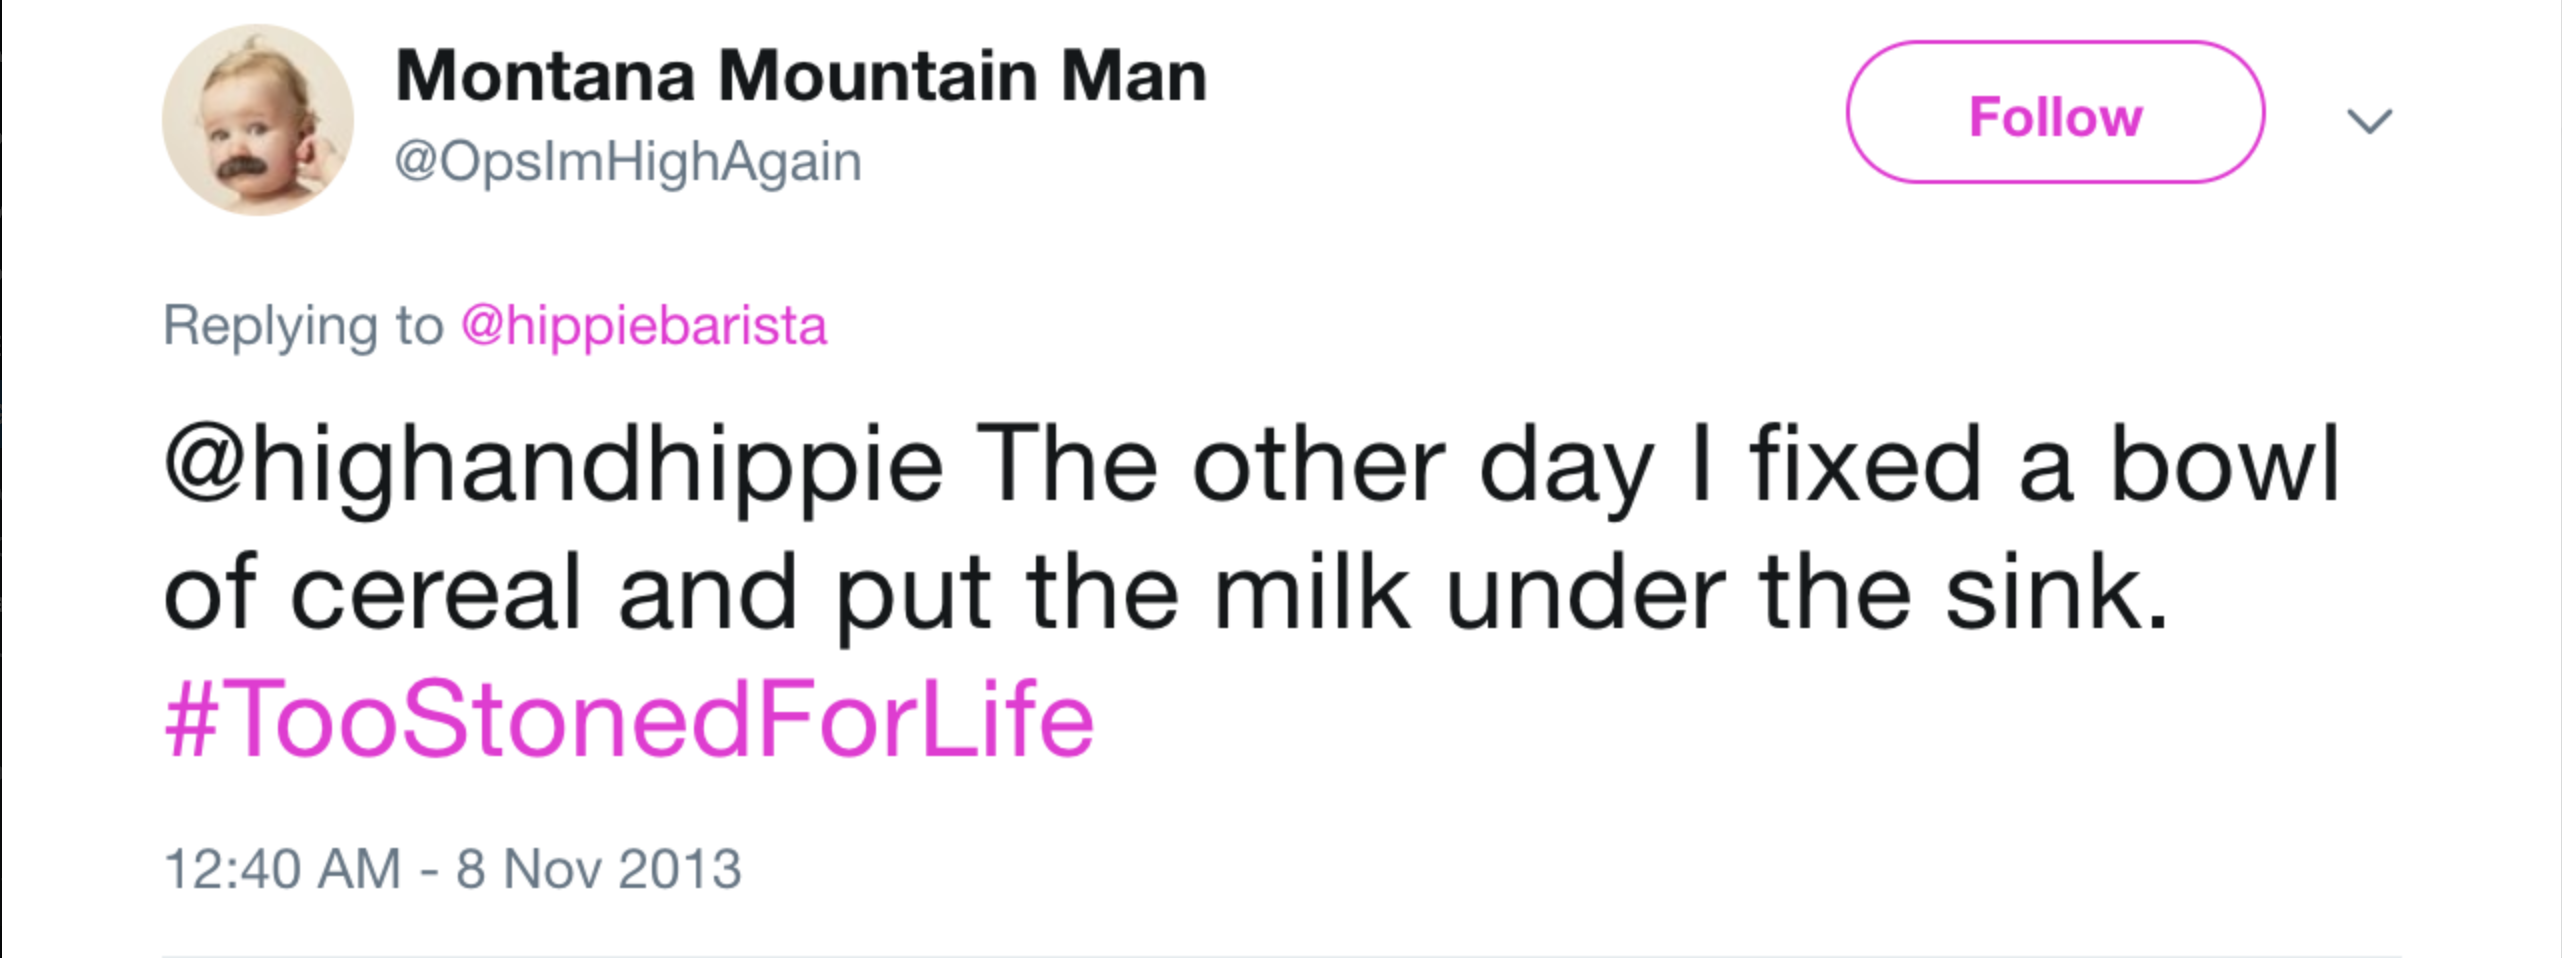 But Where Does The Milk Go?